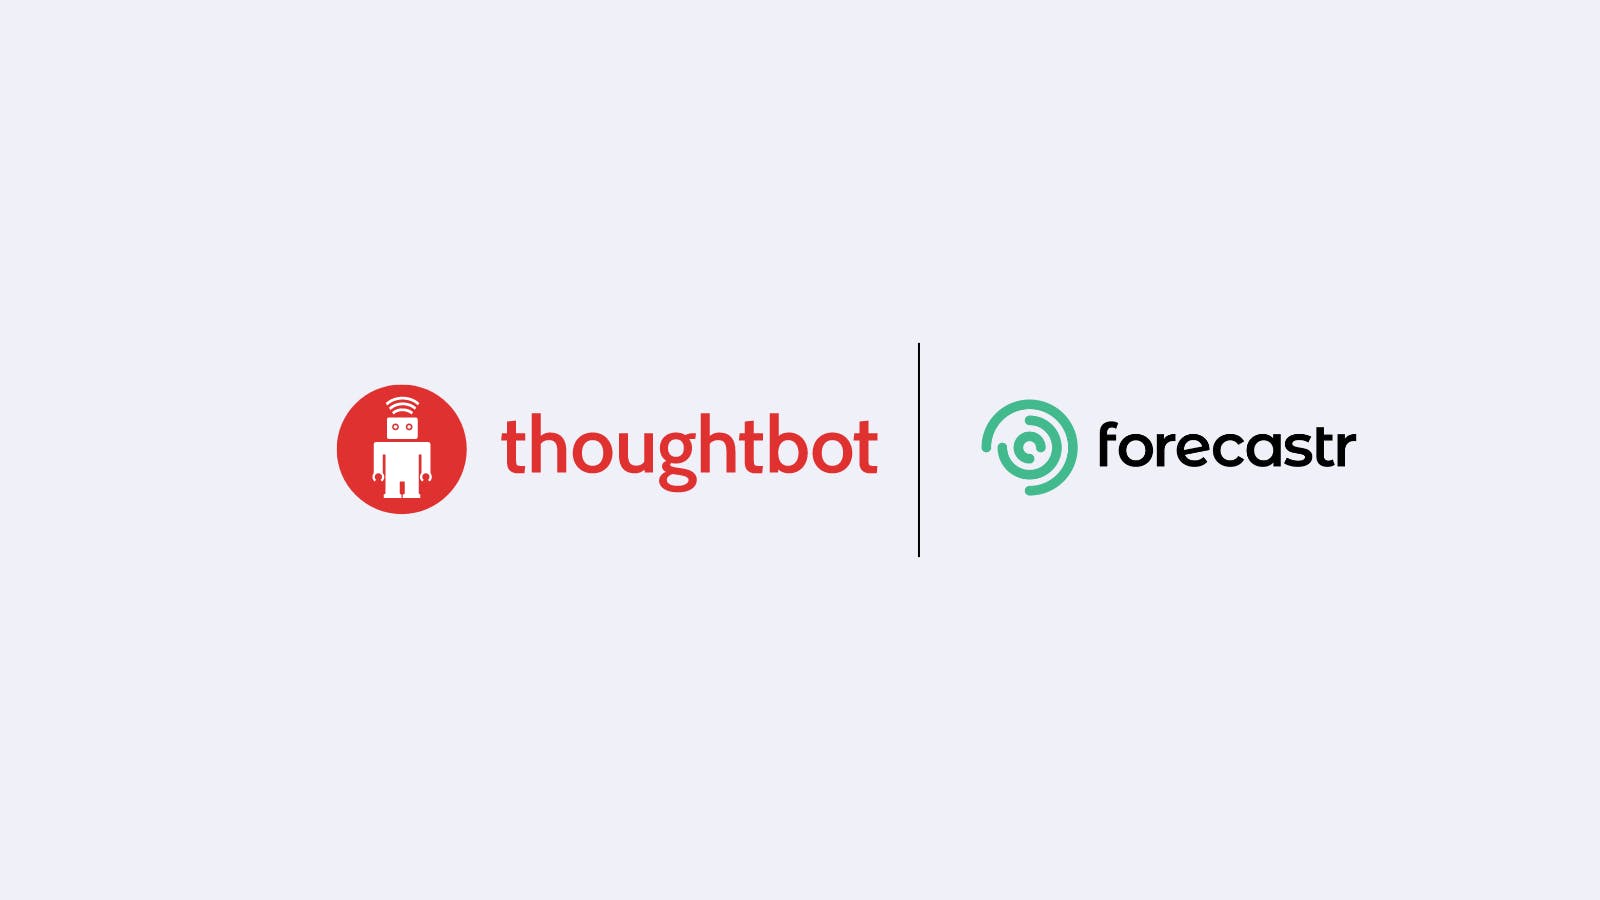 thoughtbot and forecastr logos